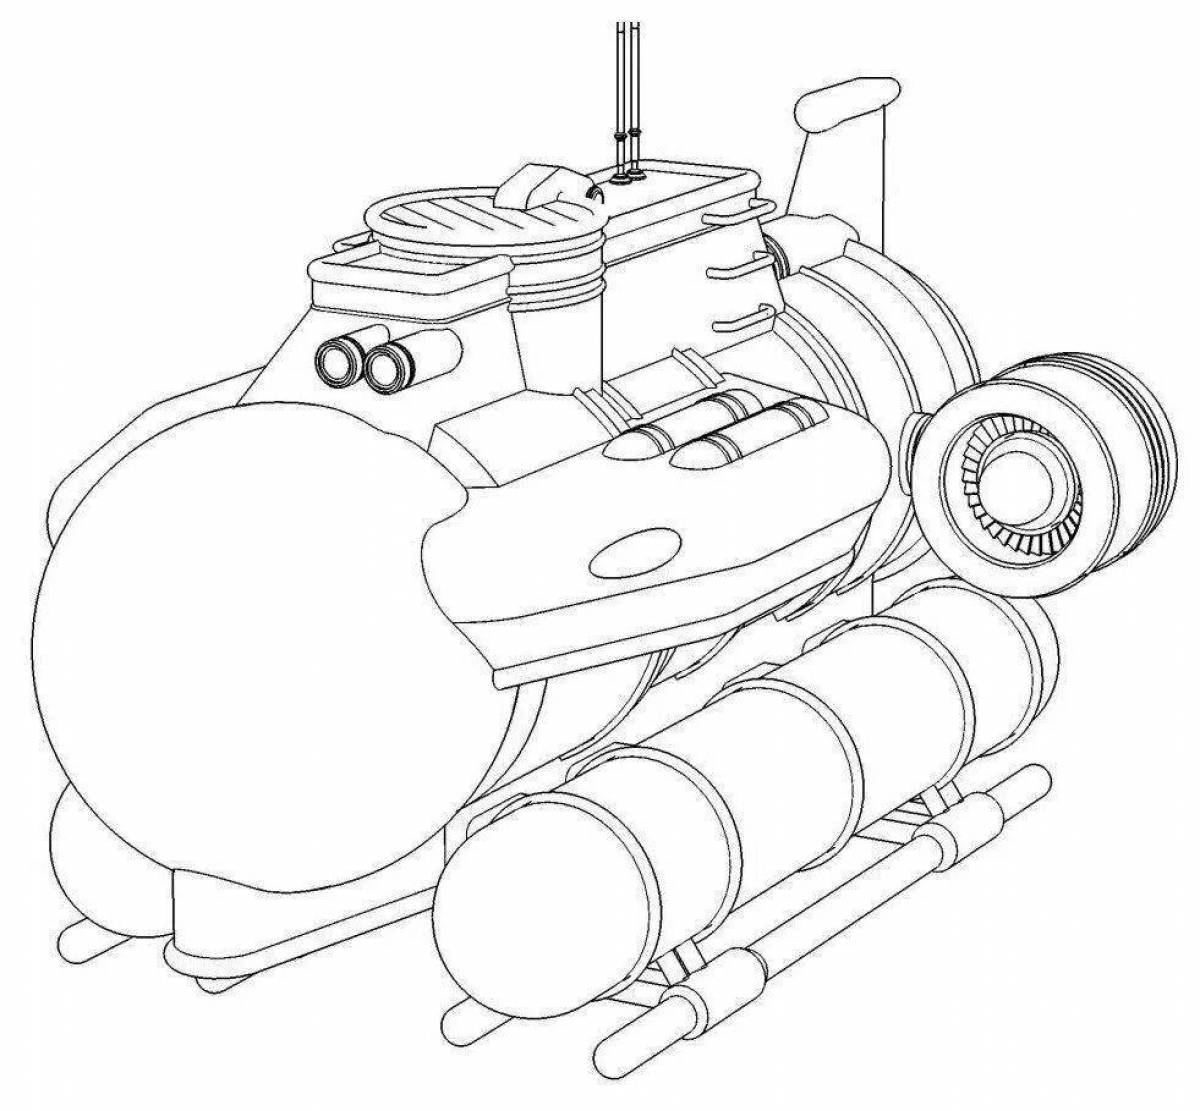 Outstanding bathyscaphe coloring page